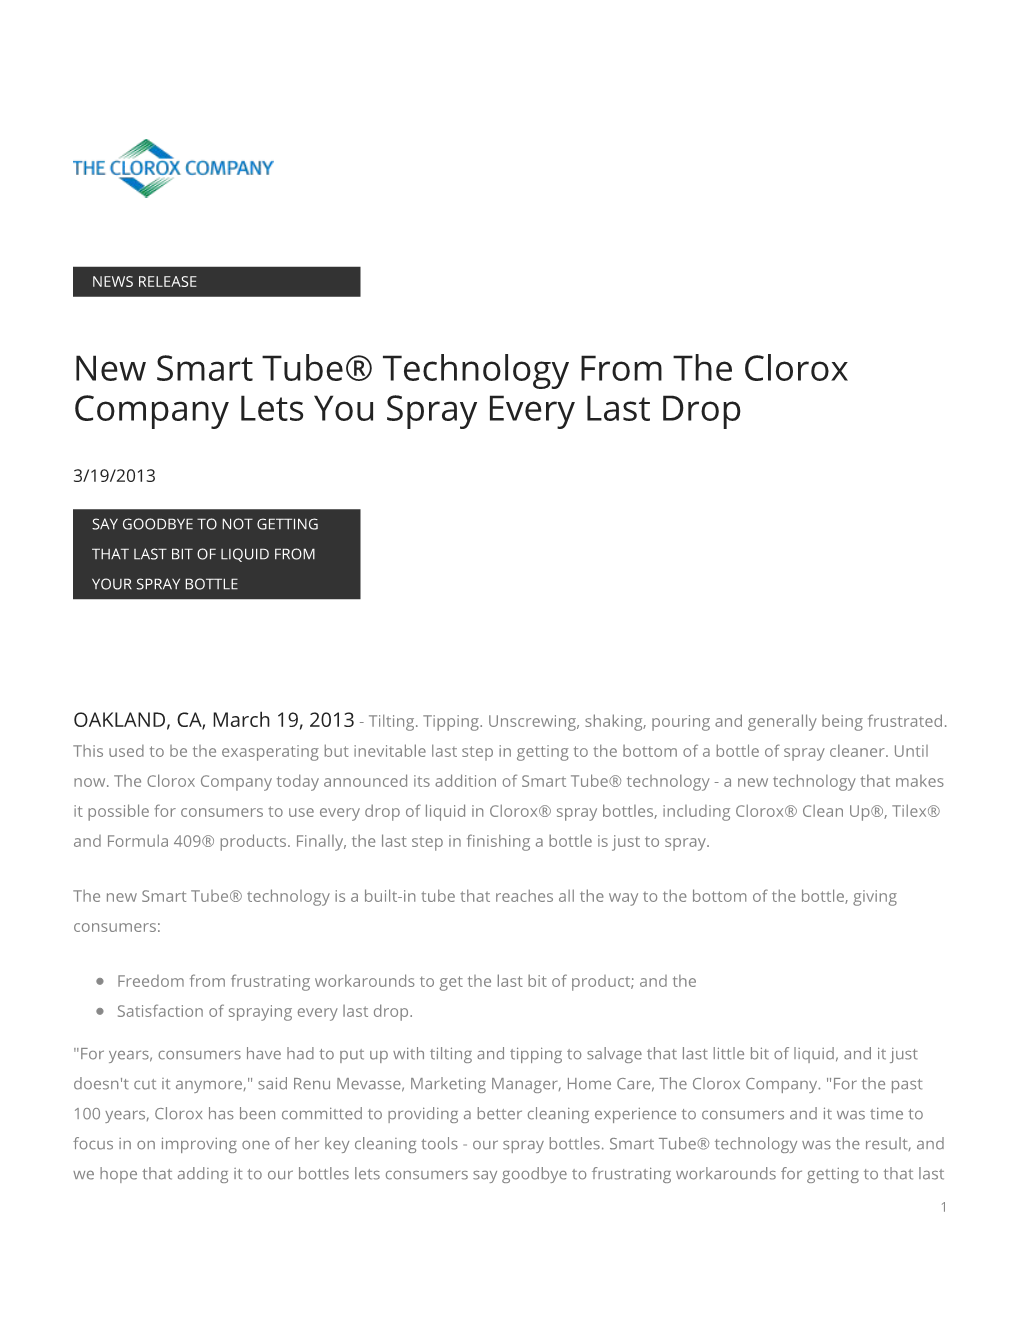 New Smart Tube® Technology from the Clorox Company Lets You Spray Every Last Drop